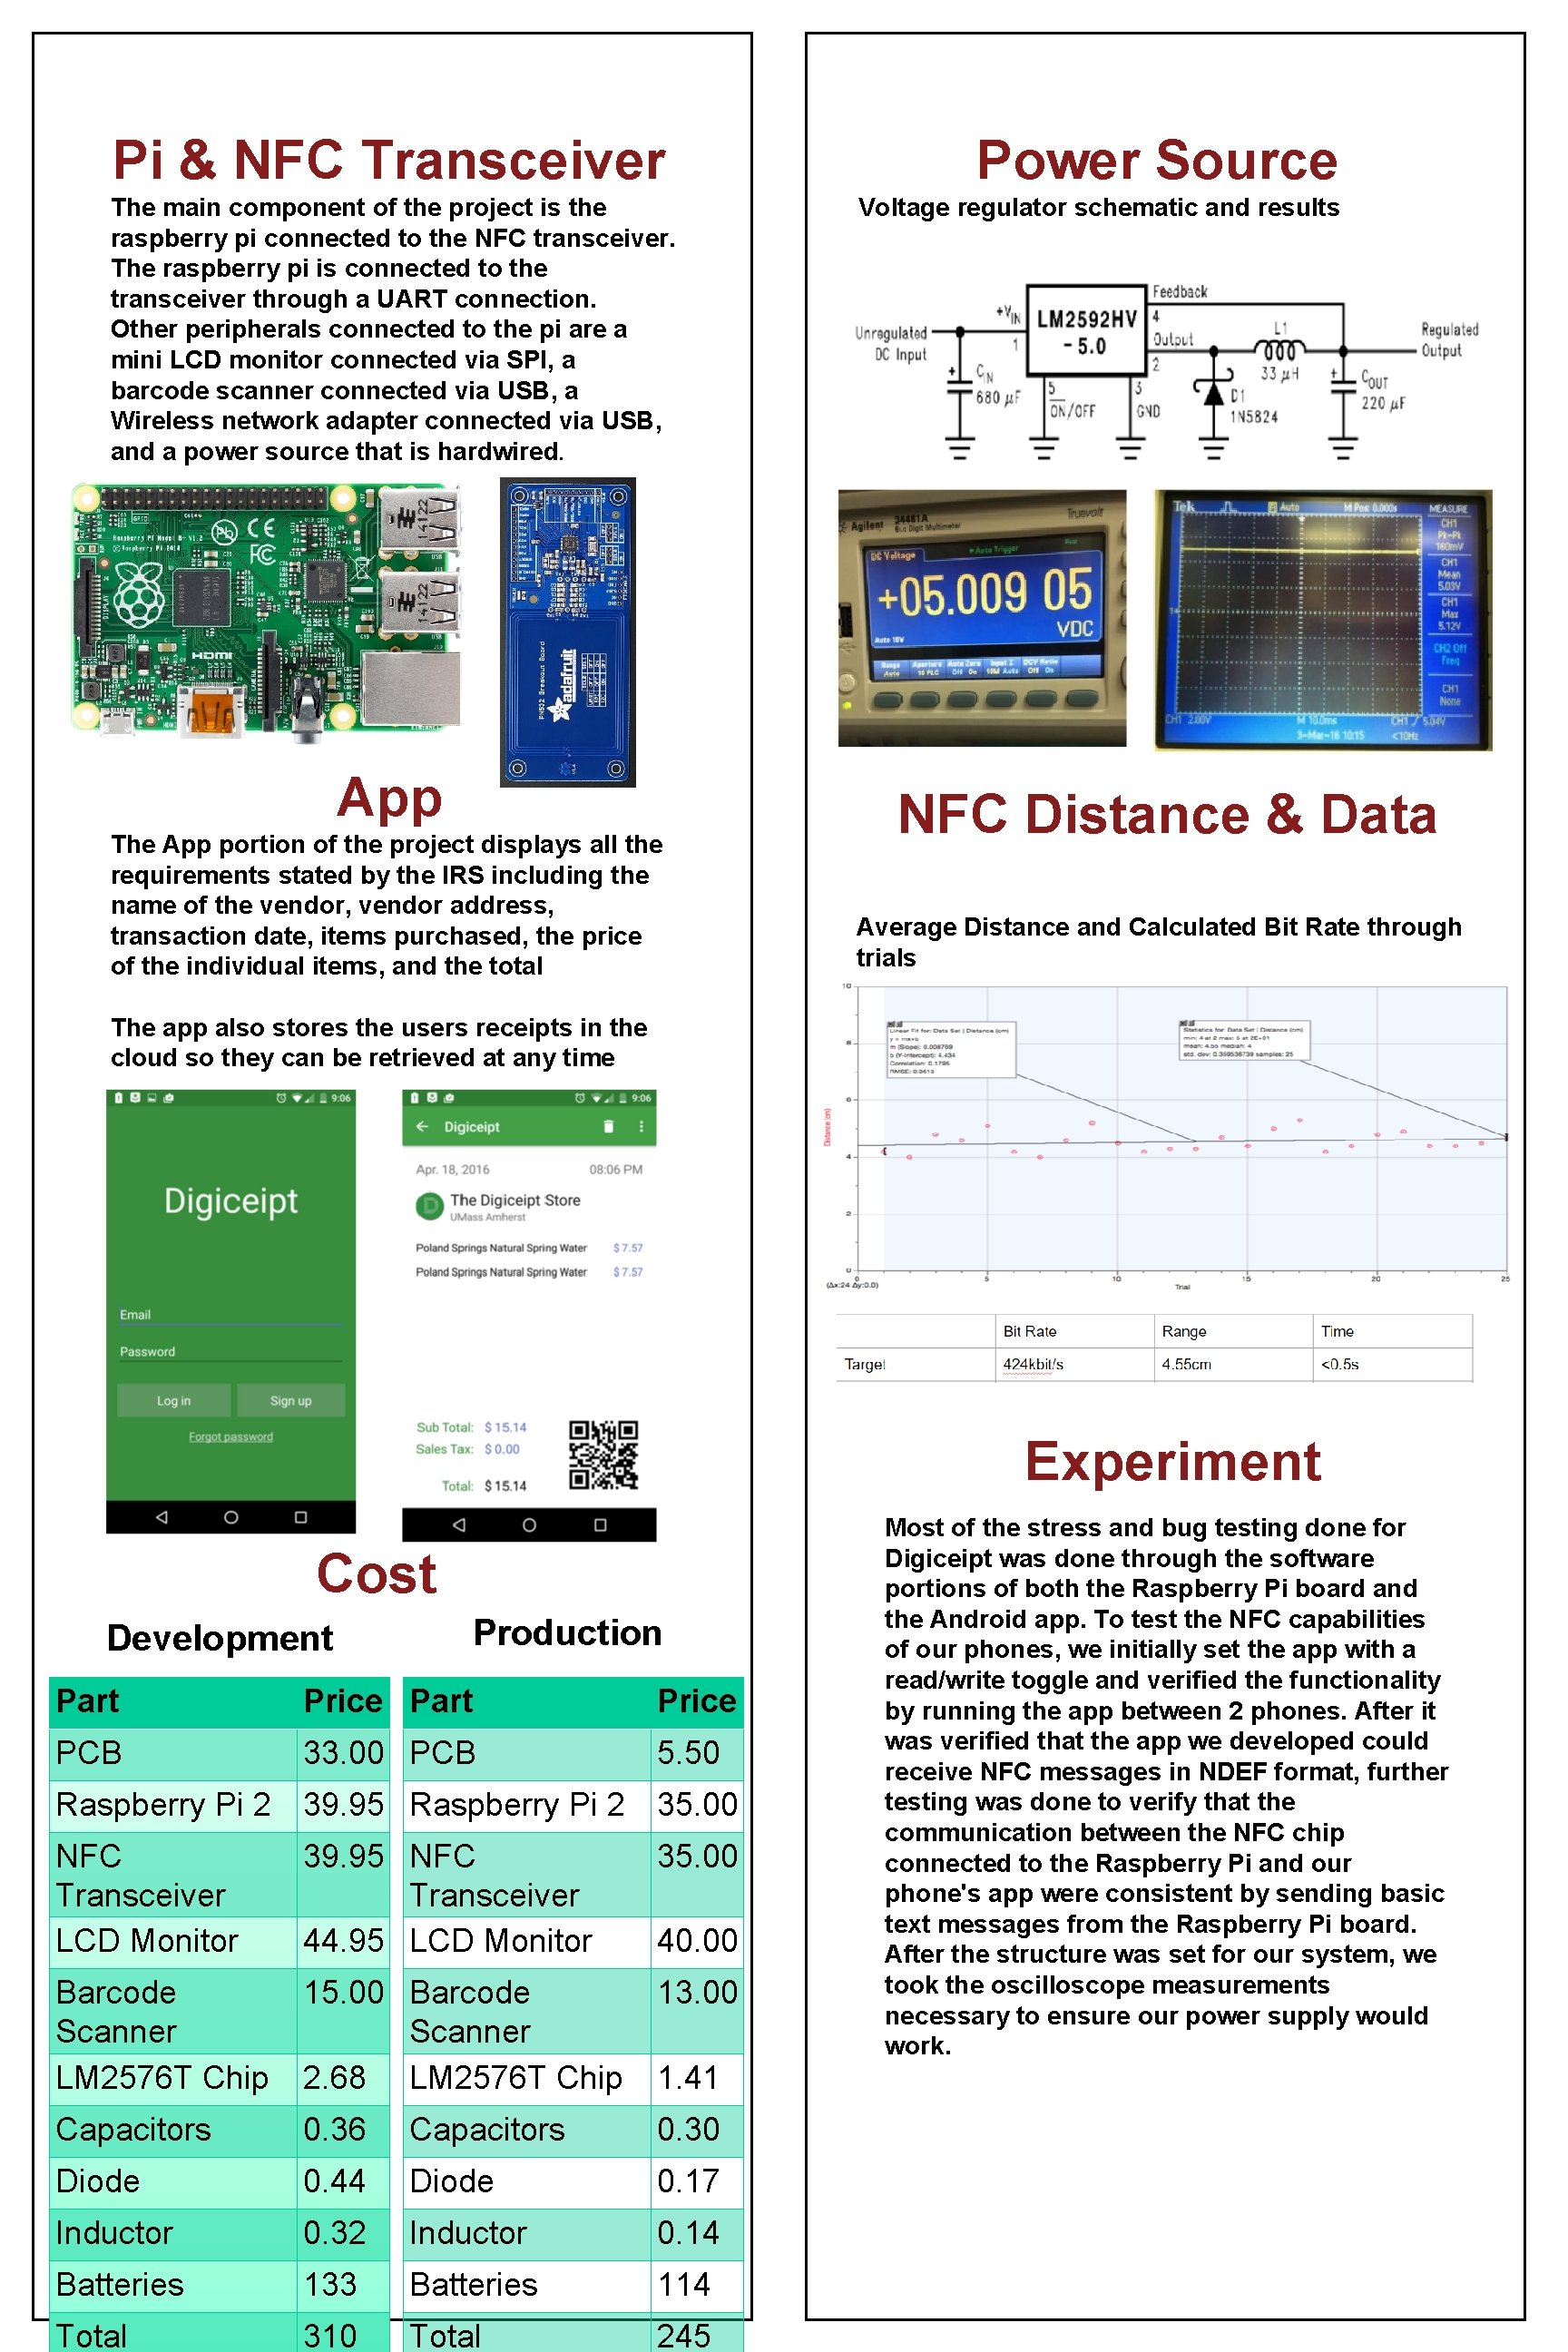 Pi & NFC Transceiver The main component of the project is the raspberry pi